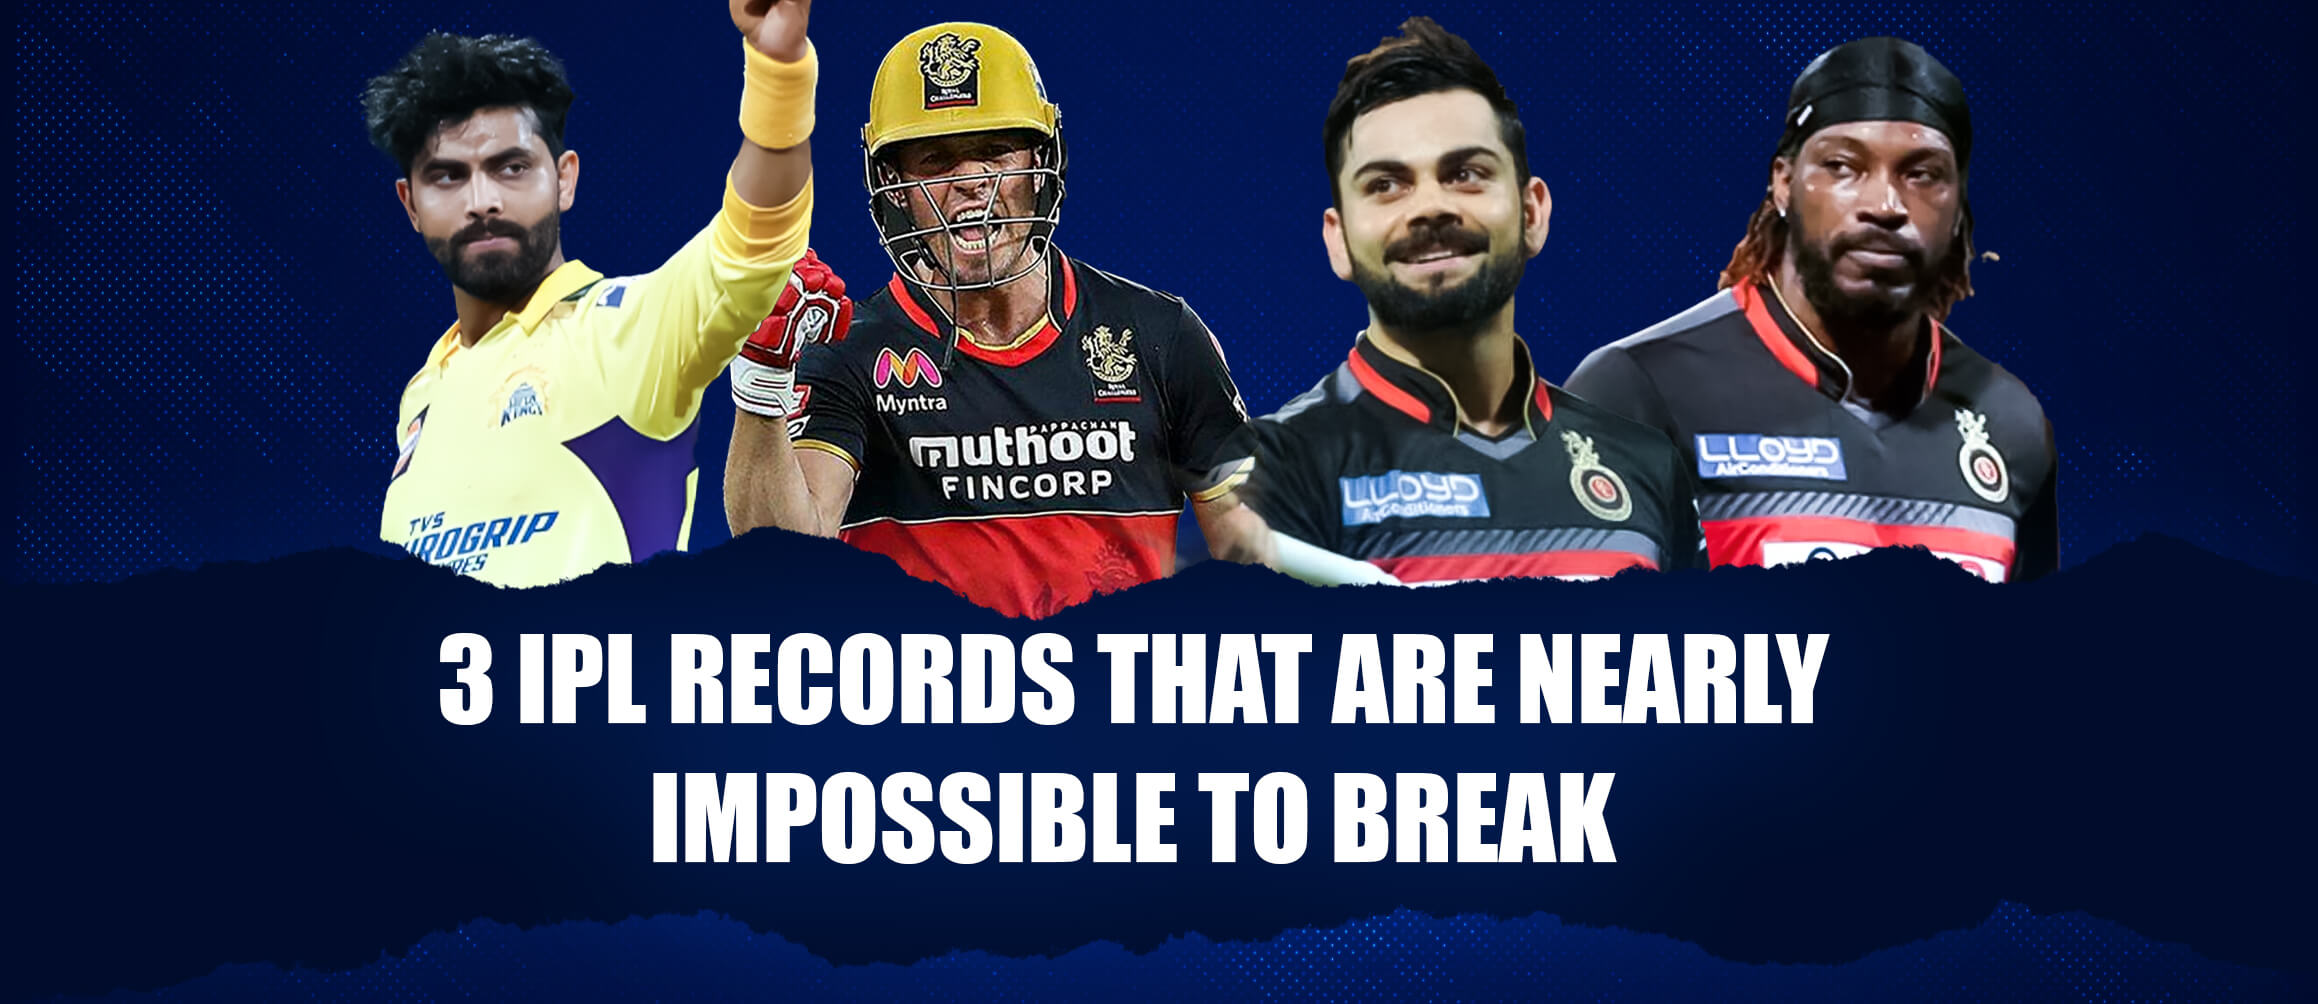 3 IPL Records that are impossible to break